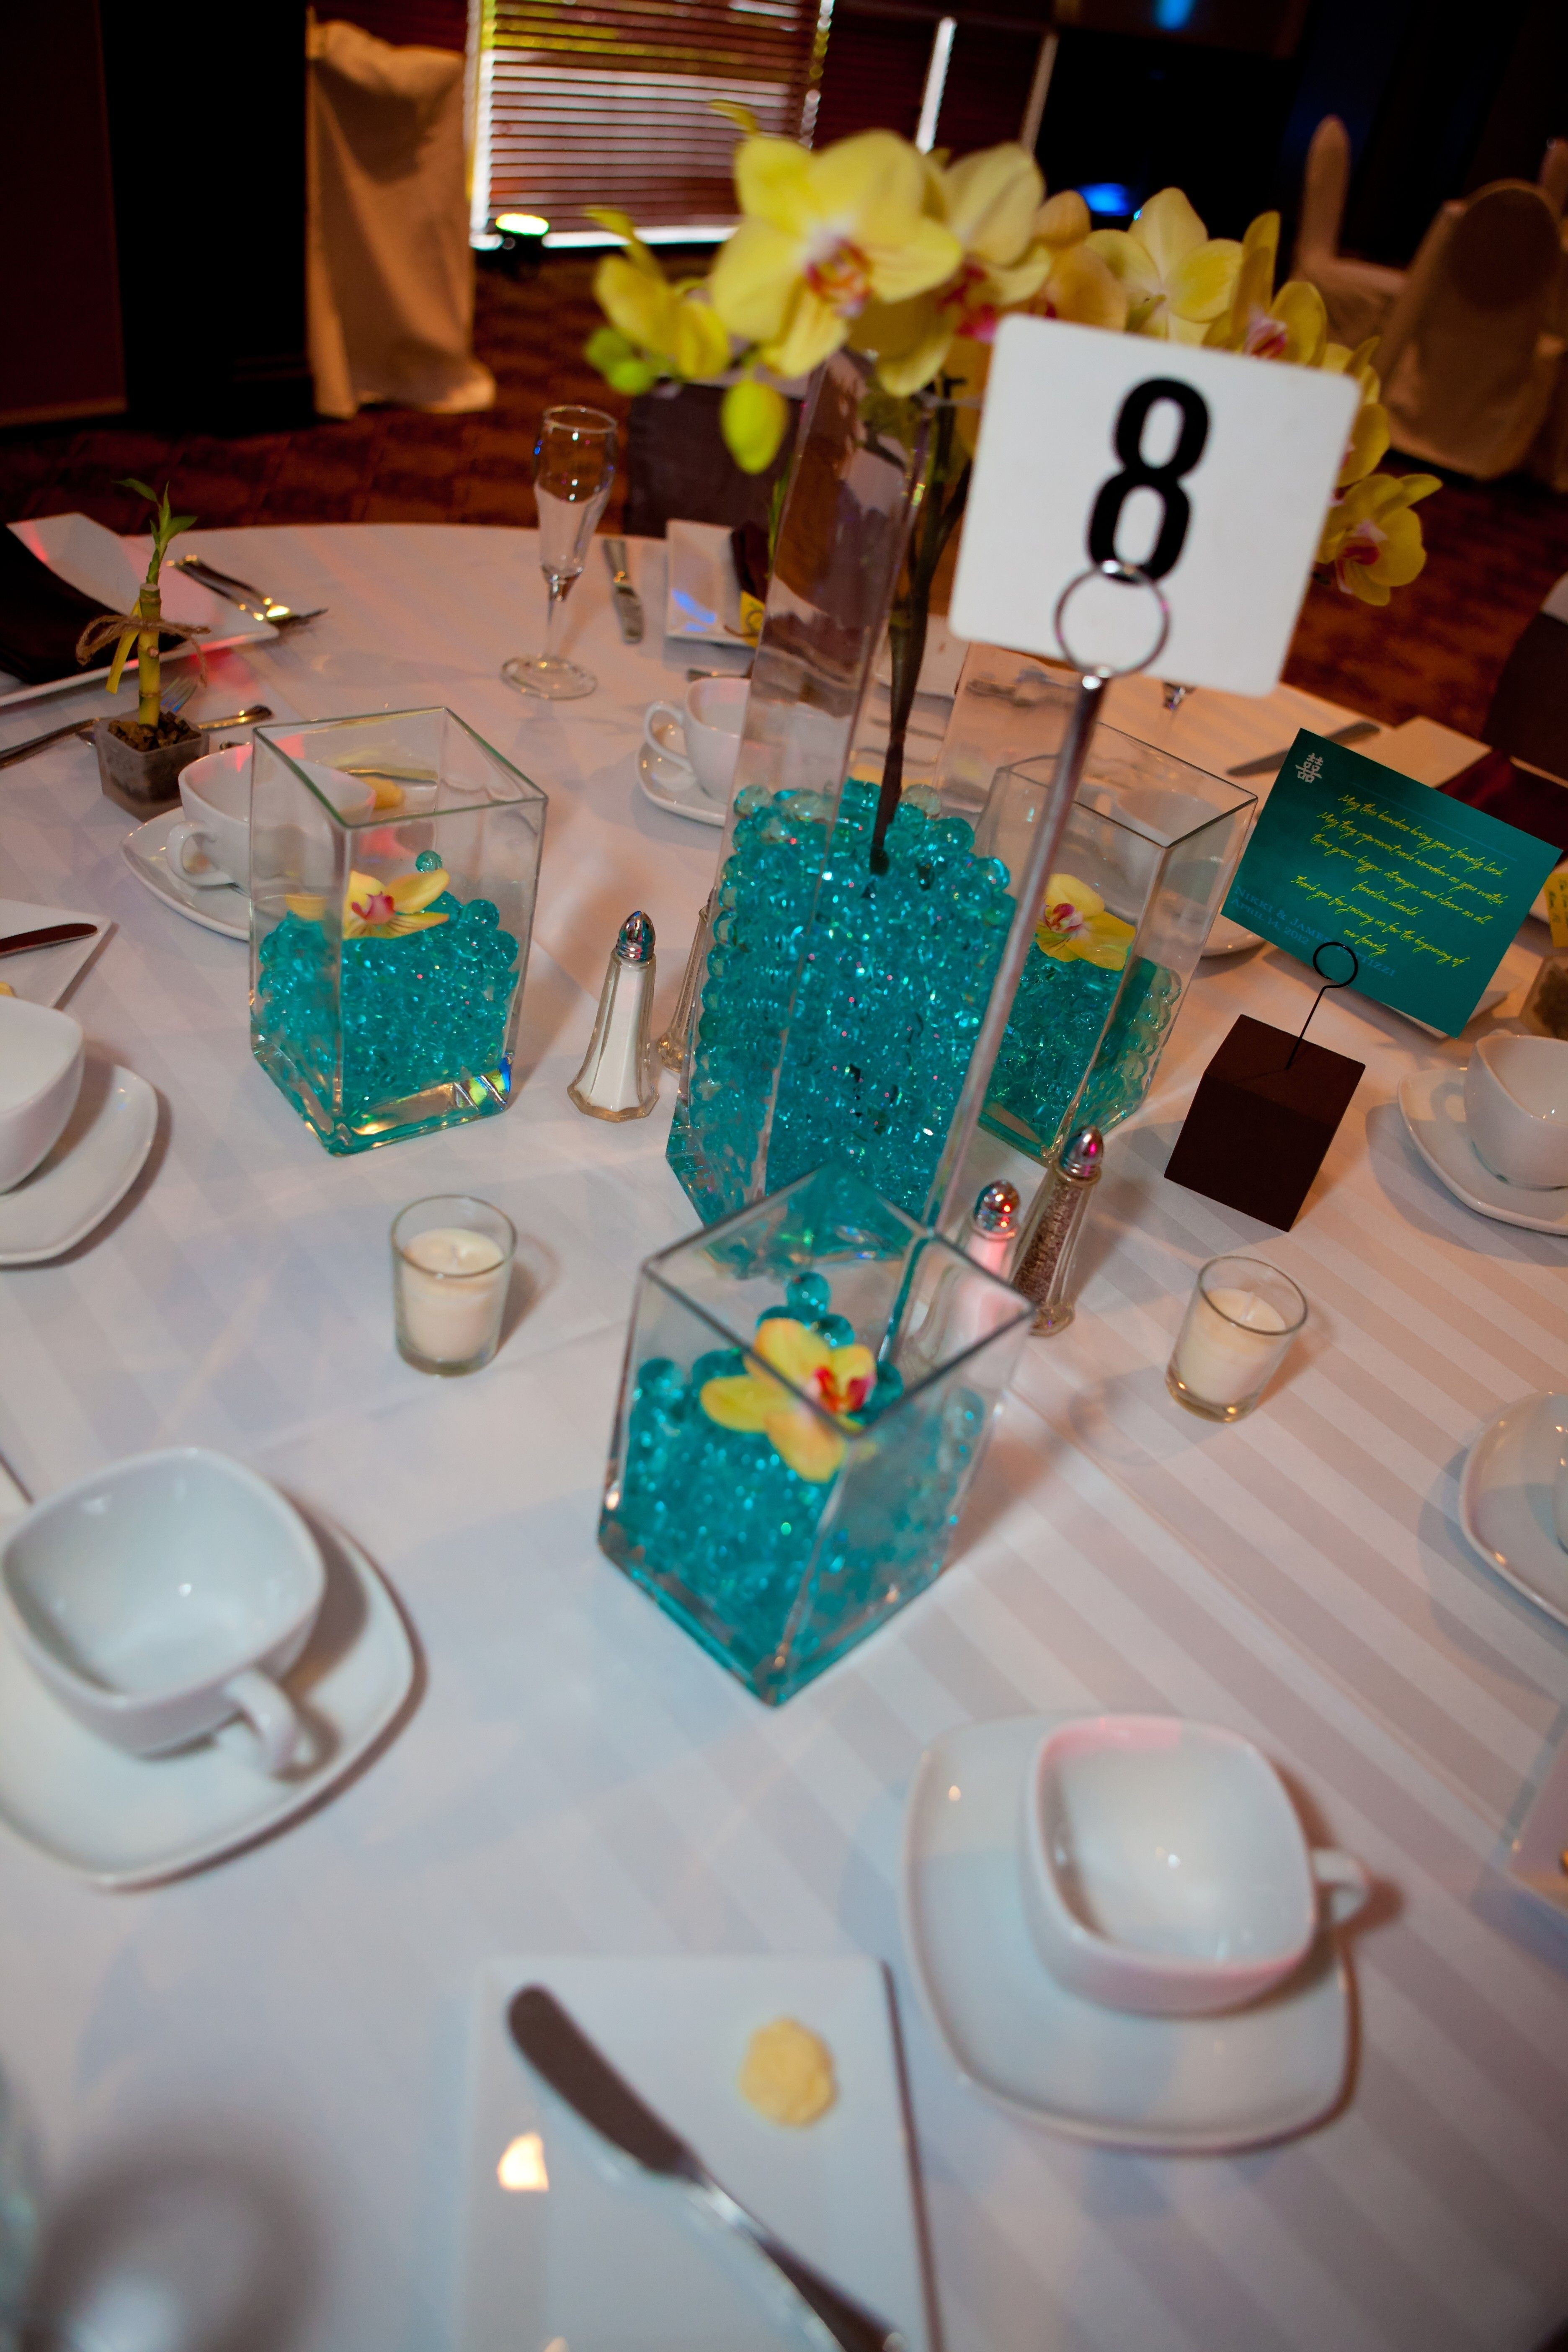 26 Famous Family Dollar Vases 2024 free download family dollar vases of wedding centerpieces square vases teal water beads yellow regarding square vases teal water beads yellow orchids candles